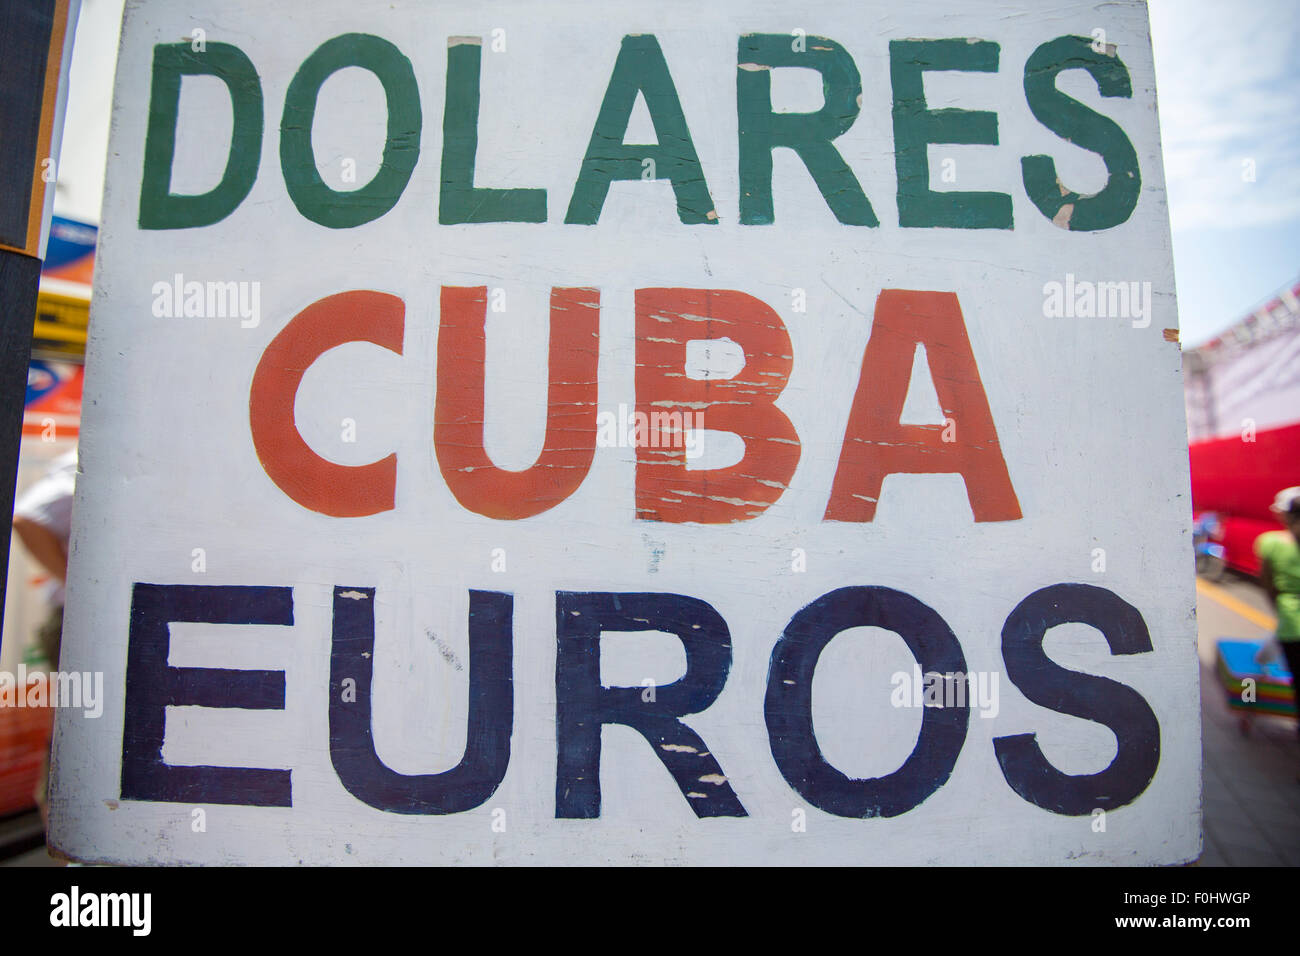 Close-up of a signboard in the street of Trujillo proposing money exchange services in Dollars, Euros and Cuban currency. Stock Photo